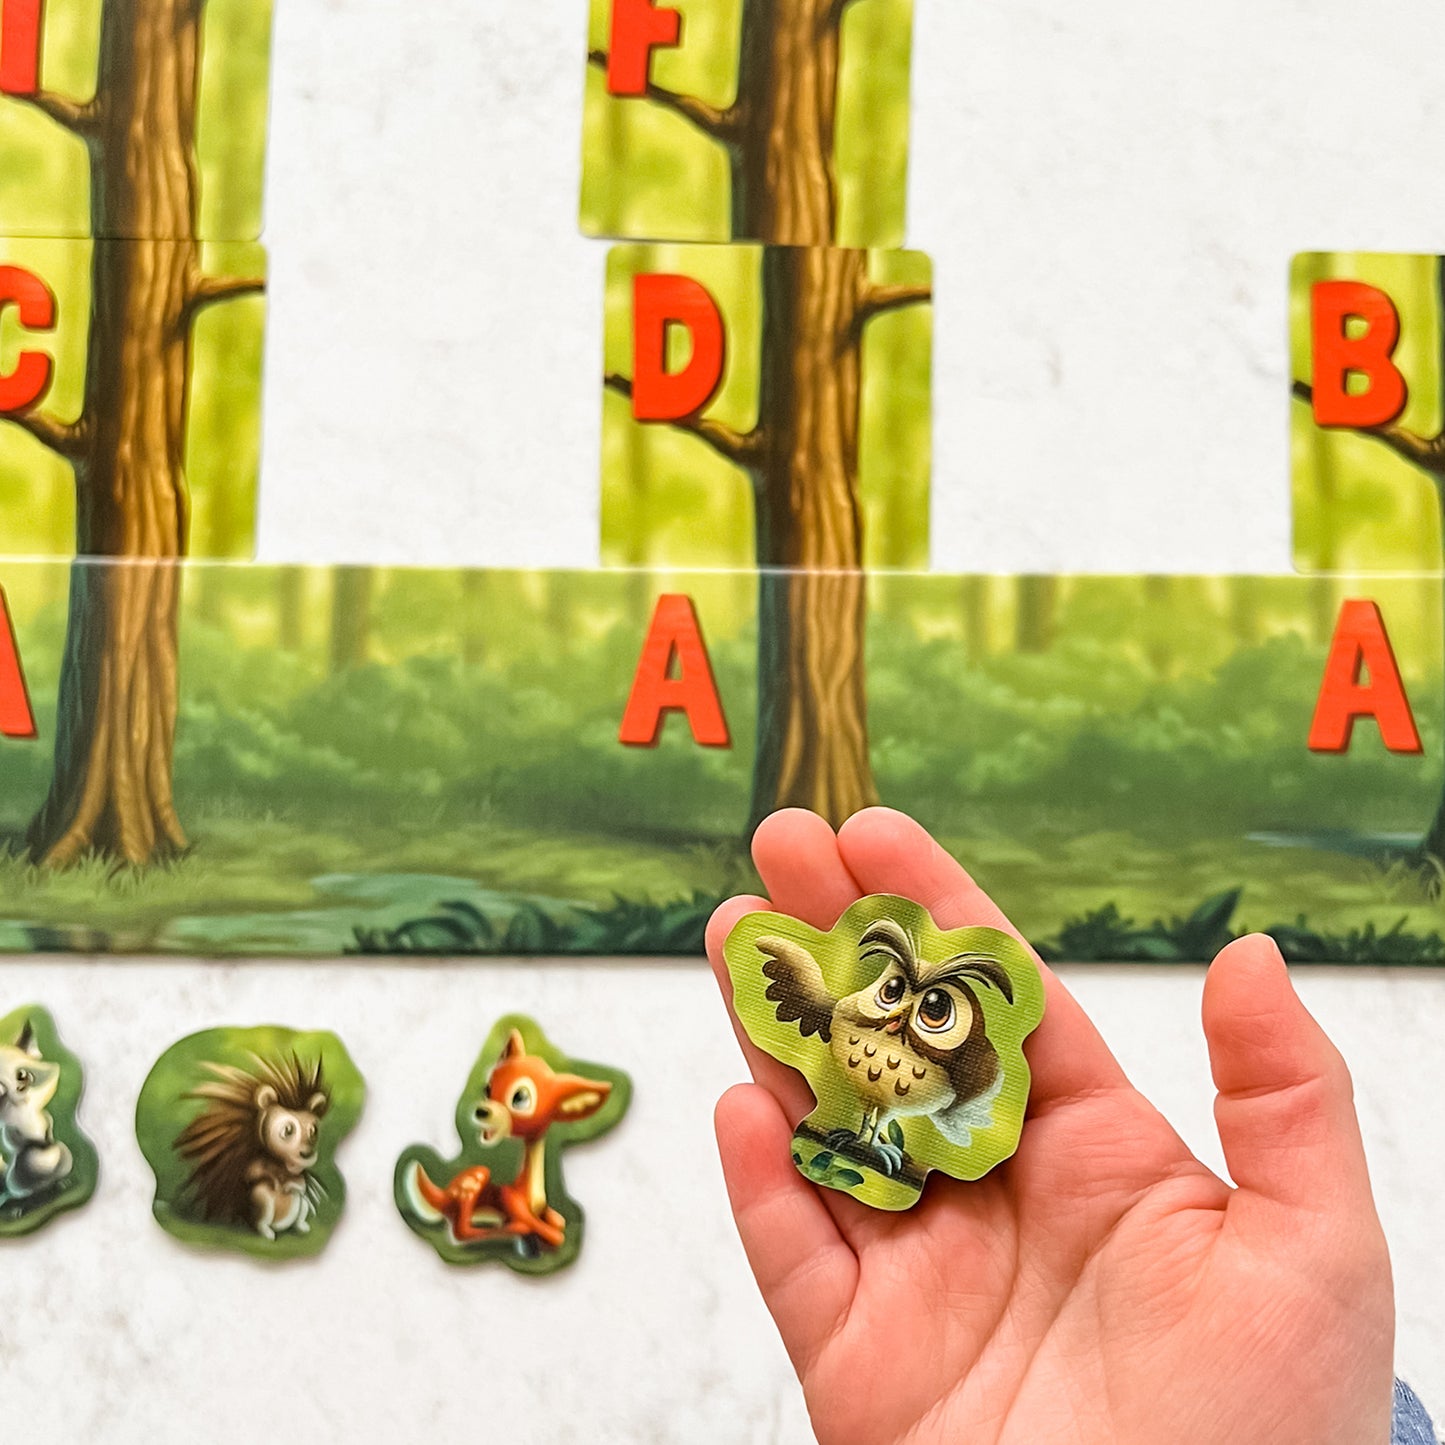 Alphabet Woods educational board game by SimplyFun for kids aged 5 and up